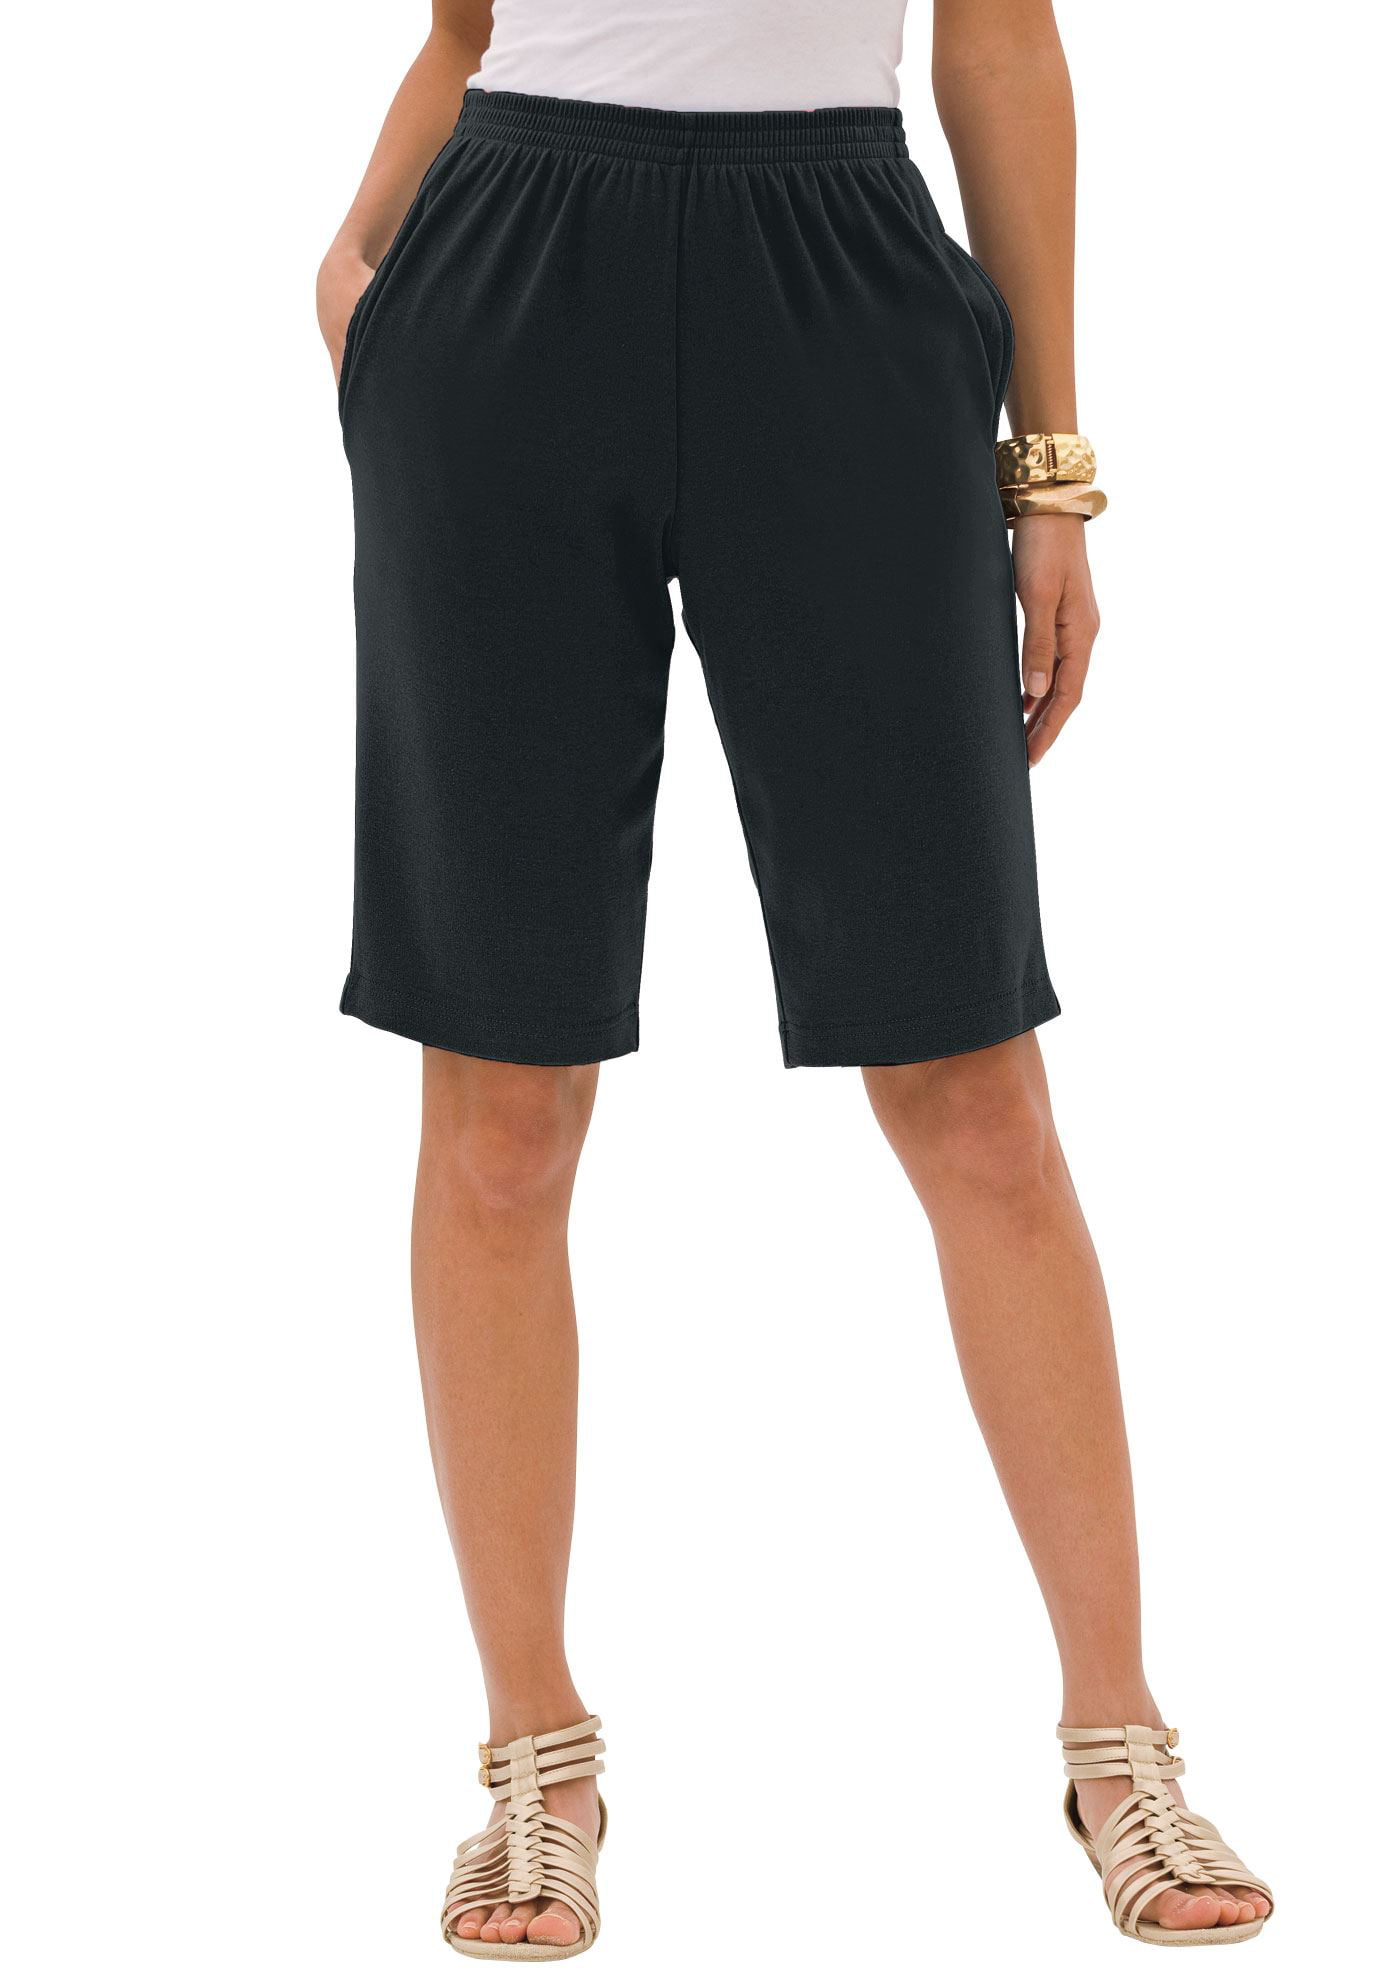 Women?s Essential Cotton Shorts Available in Missy and Plus Plus Size Knit Shorts 